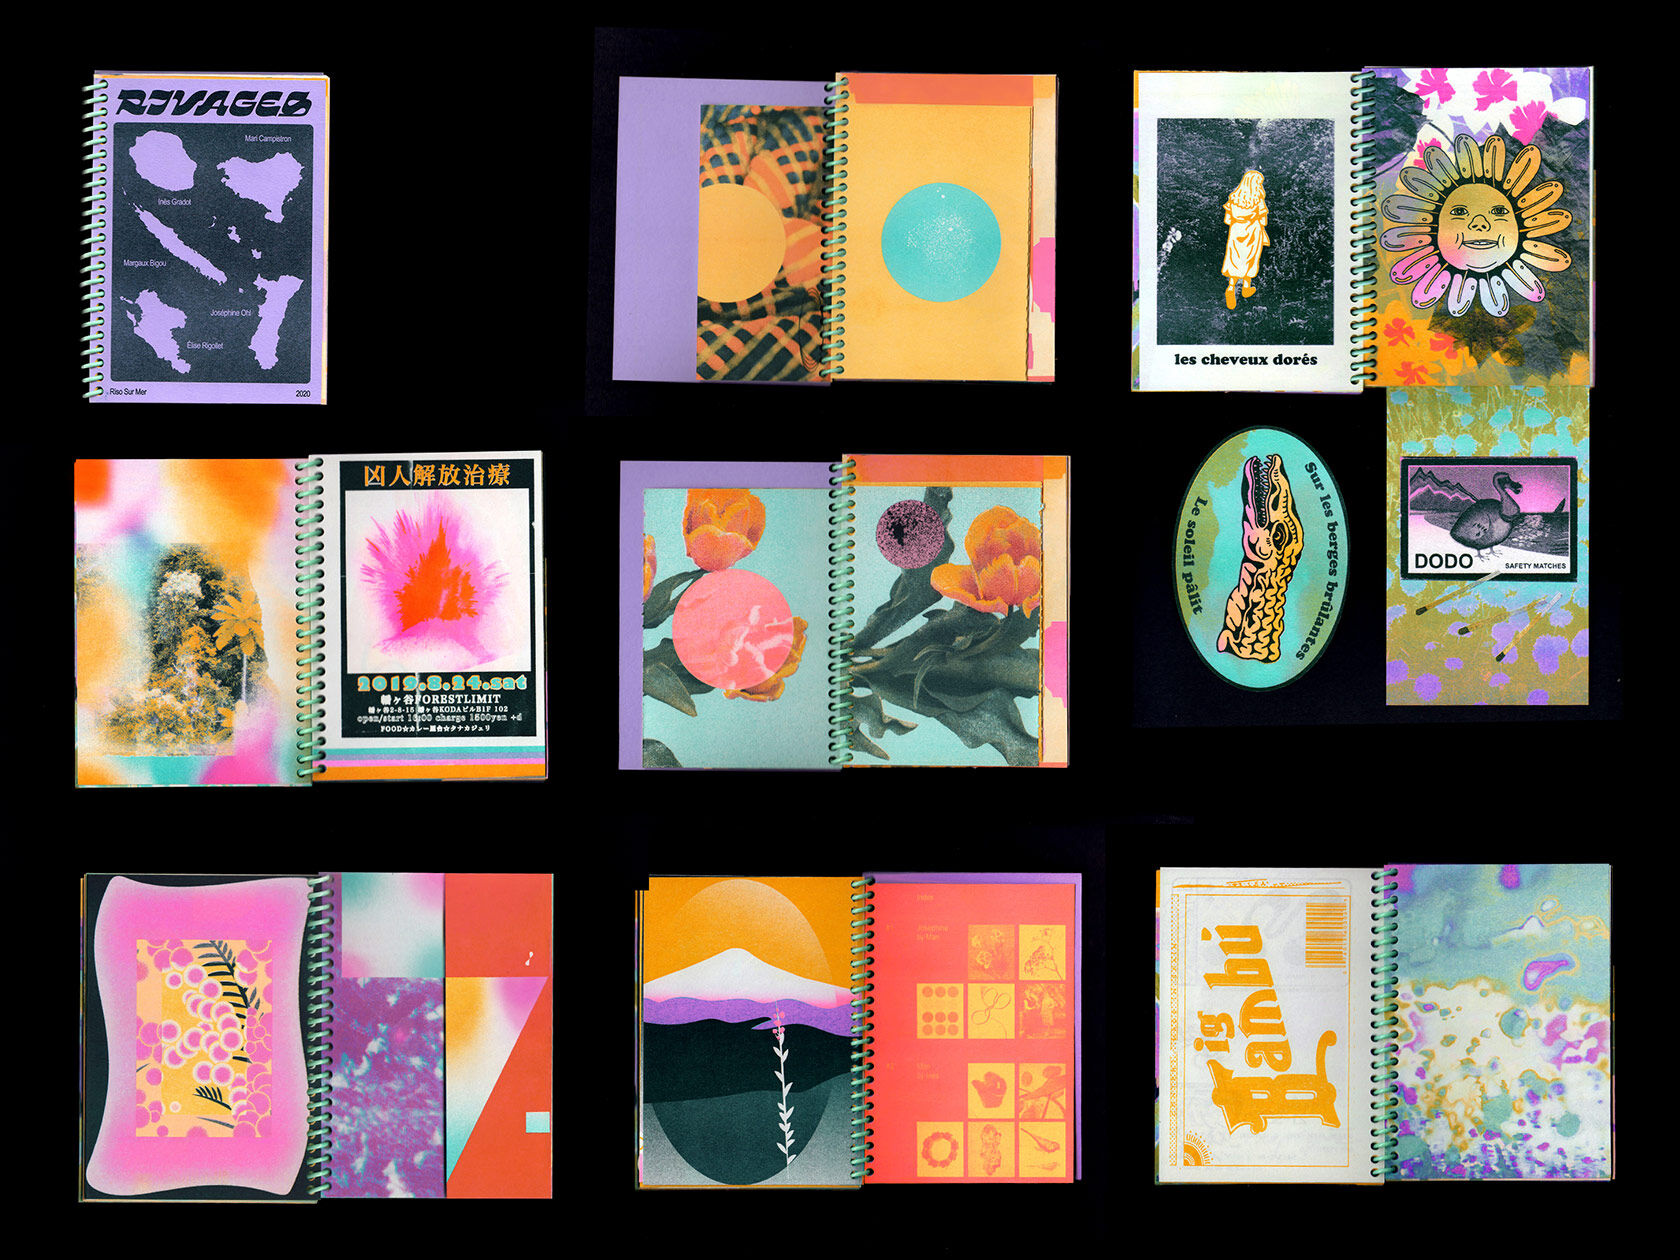 Riso sur Mer is a experimental riso-printing collective, collaborating across continents